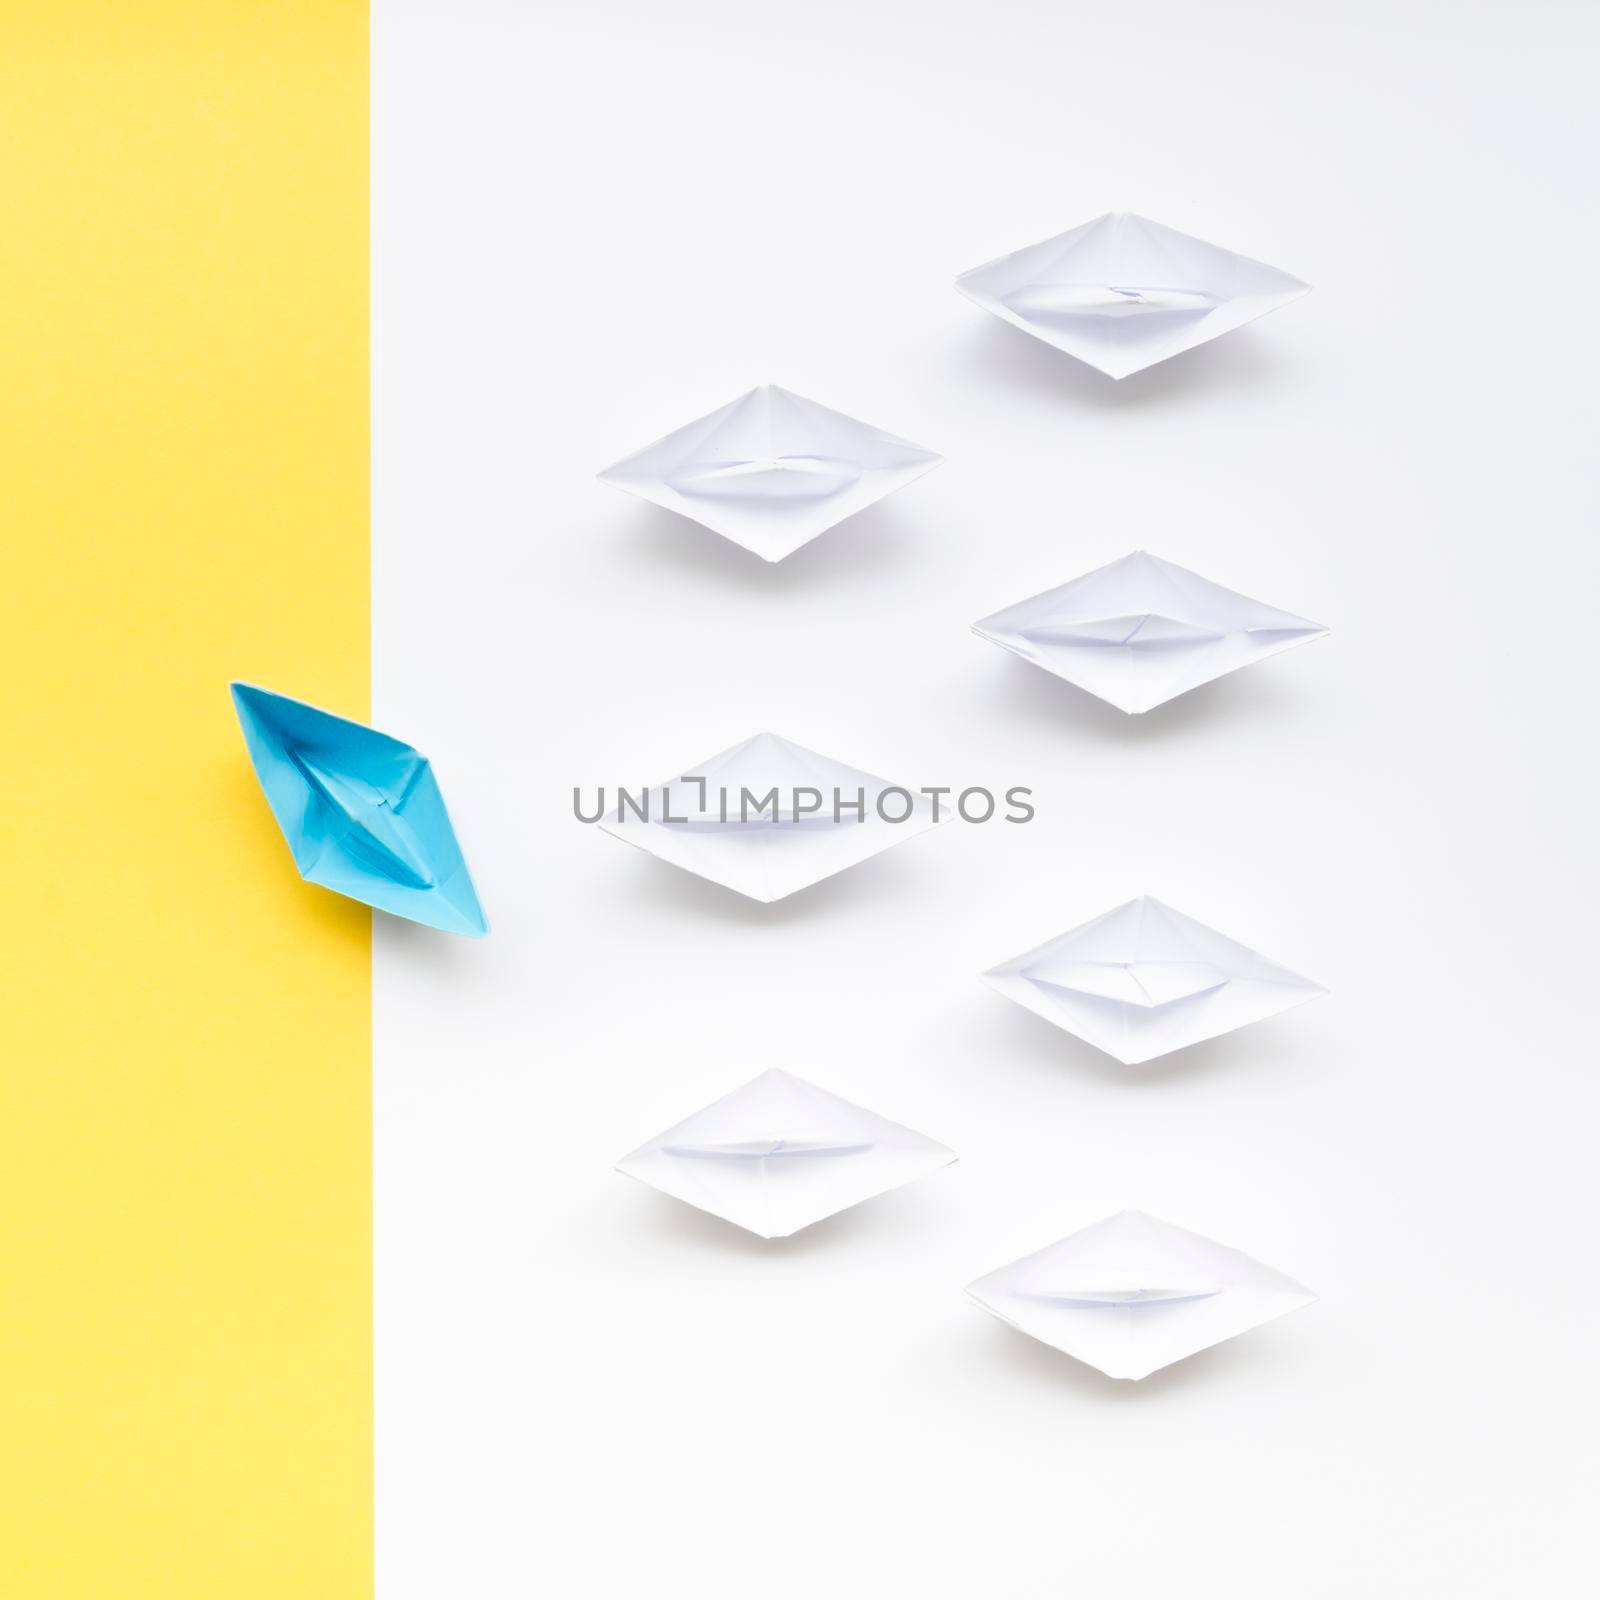 creative arrangement individuality concept paper boats. High quality photo by Zahard